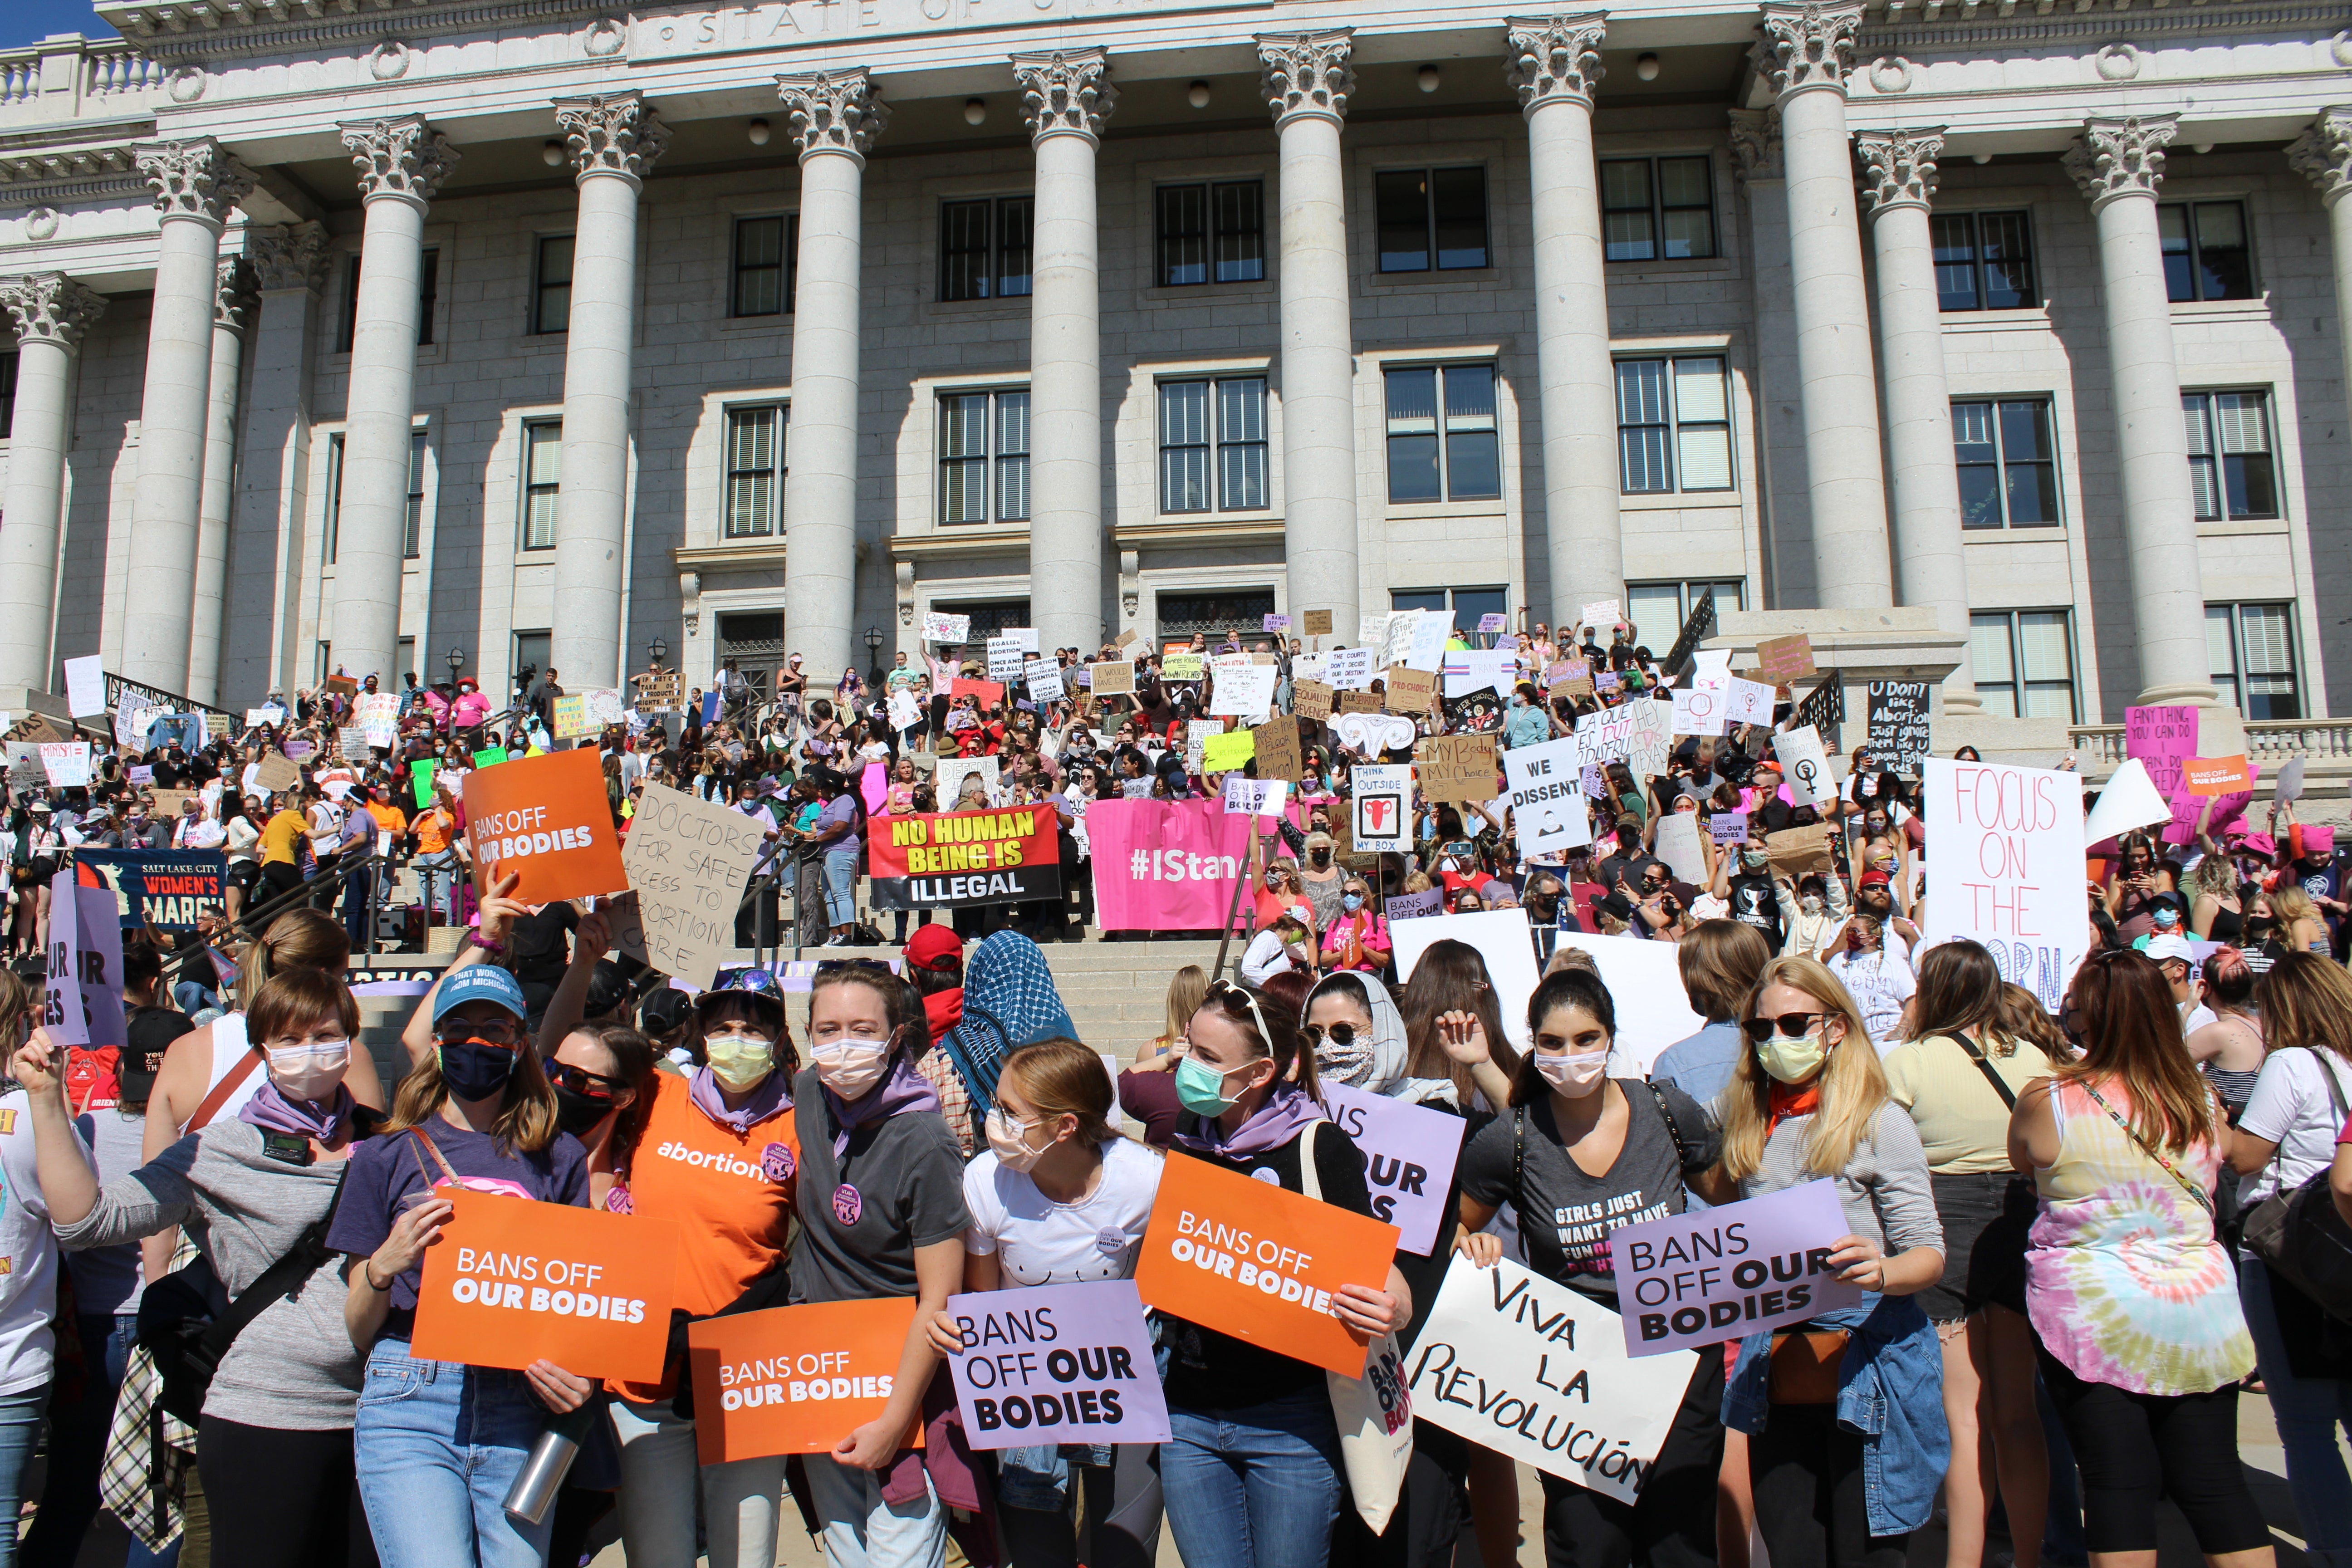 Approximately 1,000 supporters gathered in Salt Lake City on Saturday, Oct. 2 to demand safe and accessible reproductive healthcare for all.